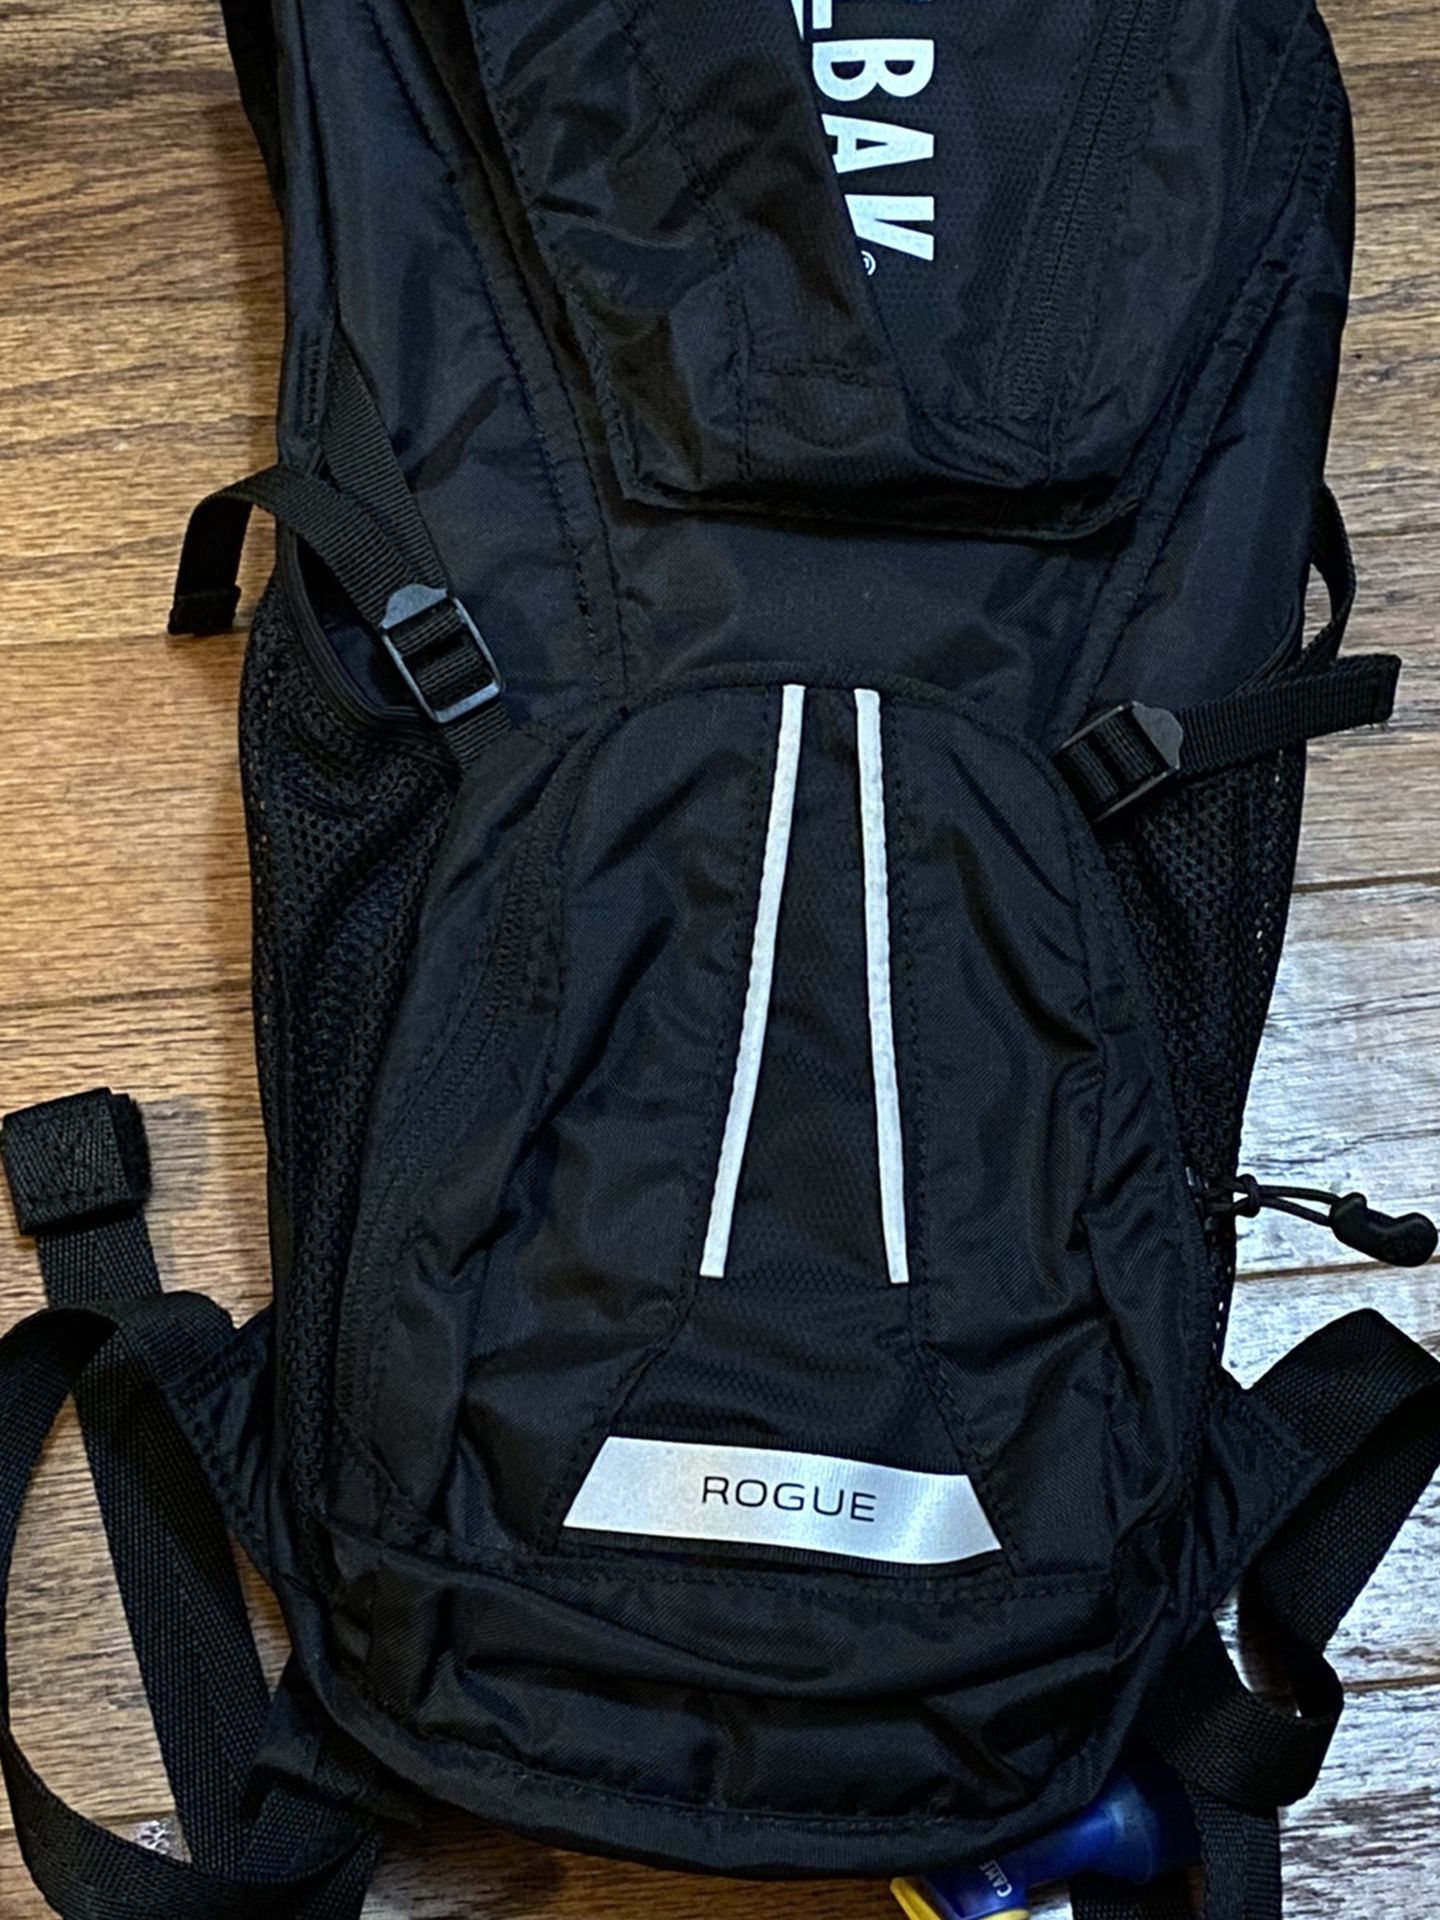 Camelbak Rogue Small Backpack With Bladder Water